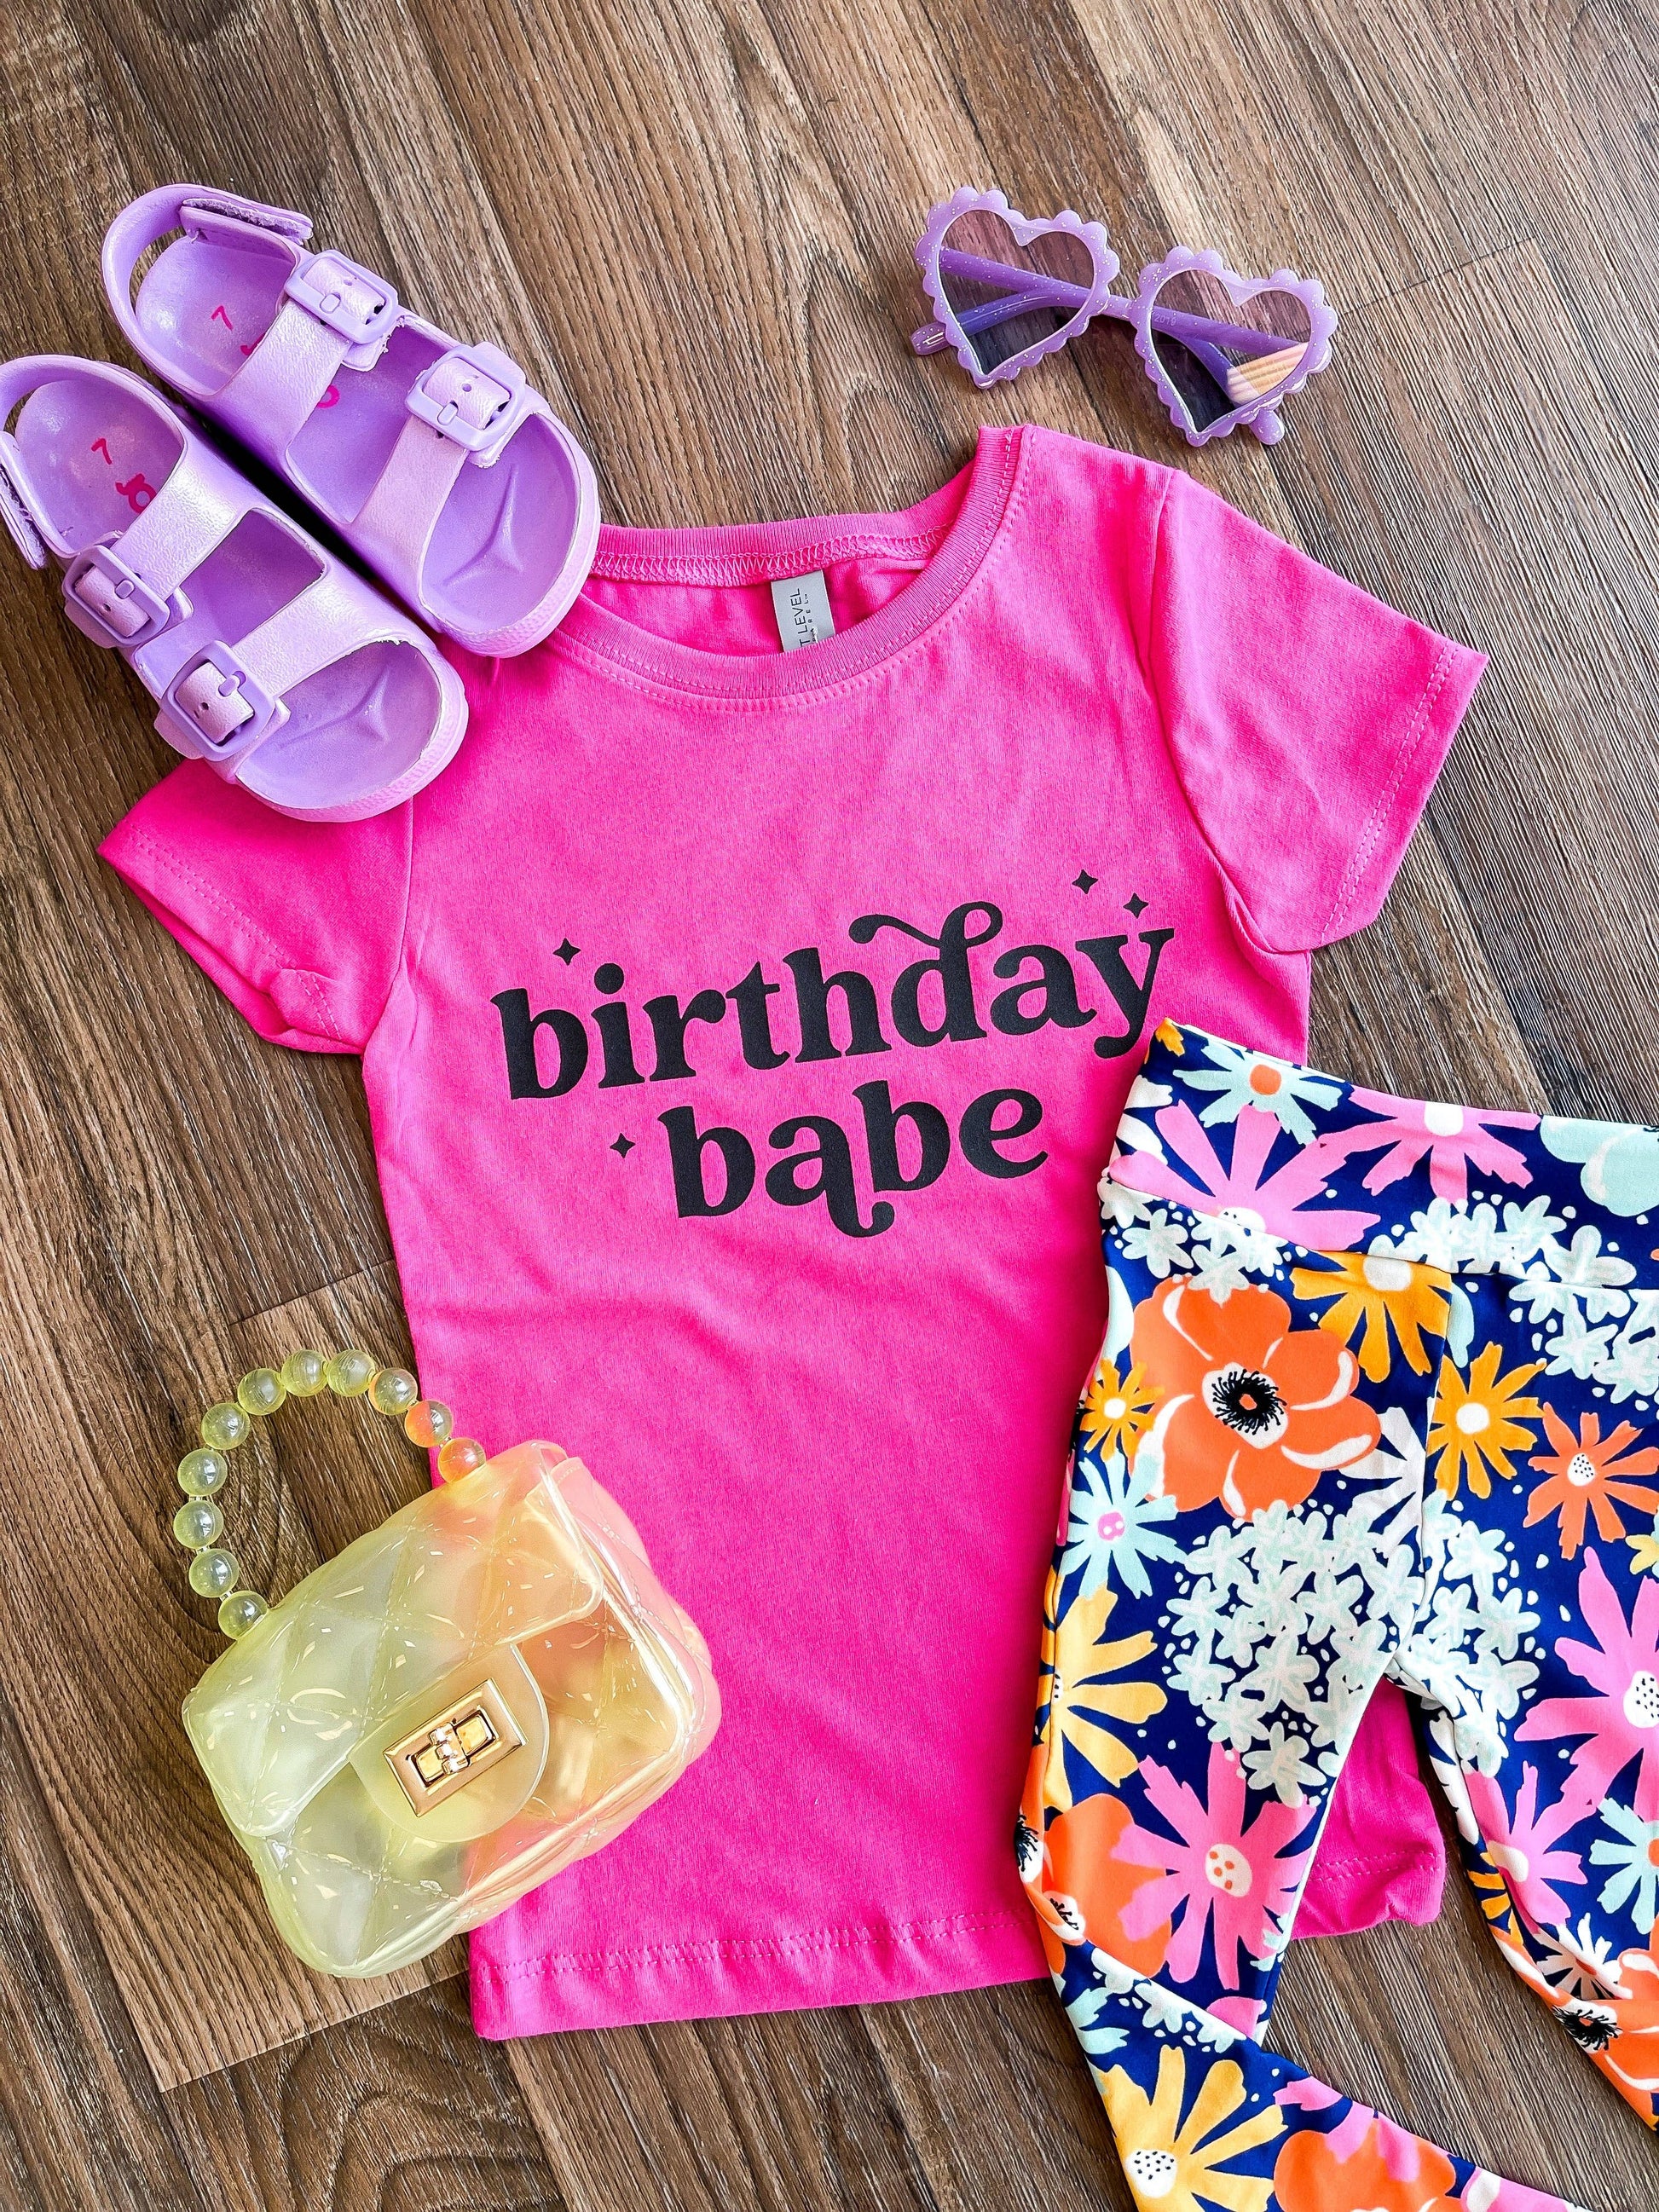 Birthday Babe | Hot Pink Youth Girl's Princess Cut Tee  Bizzy's Wholesale